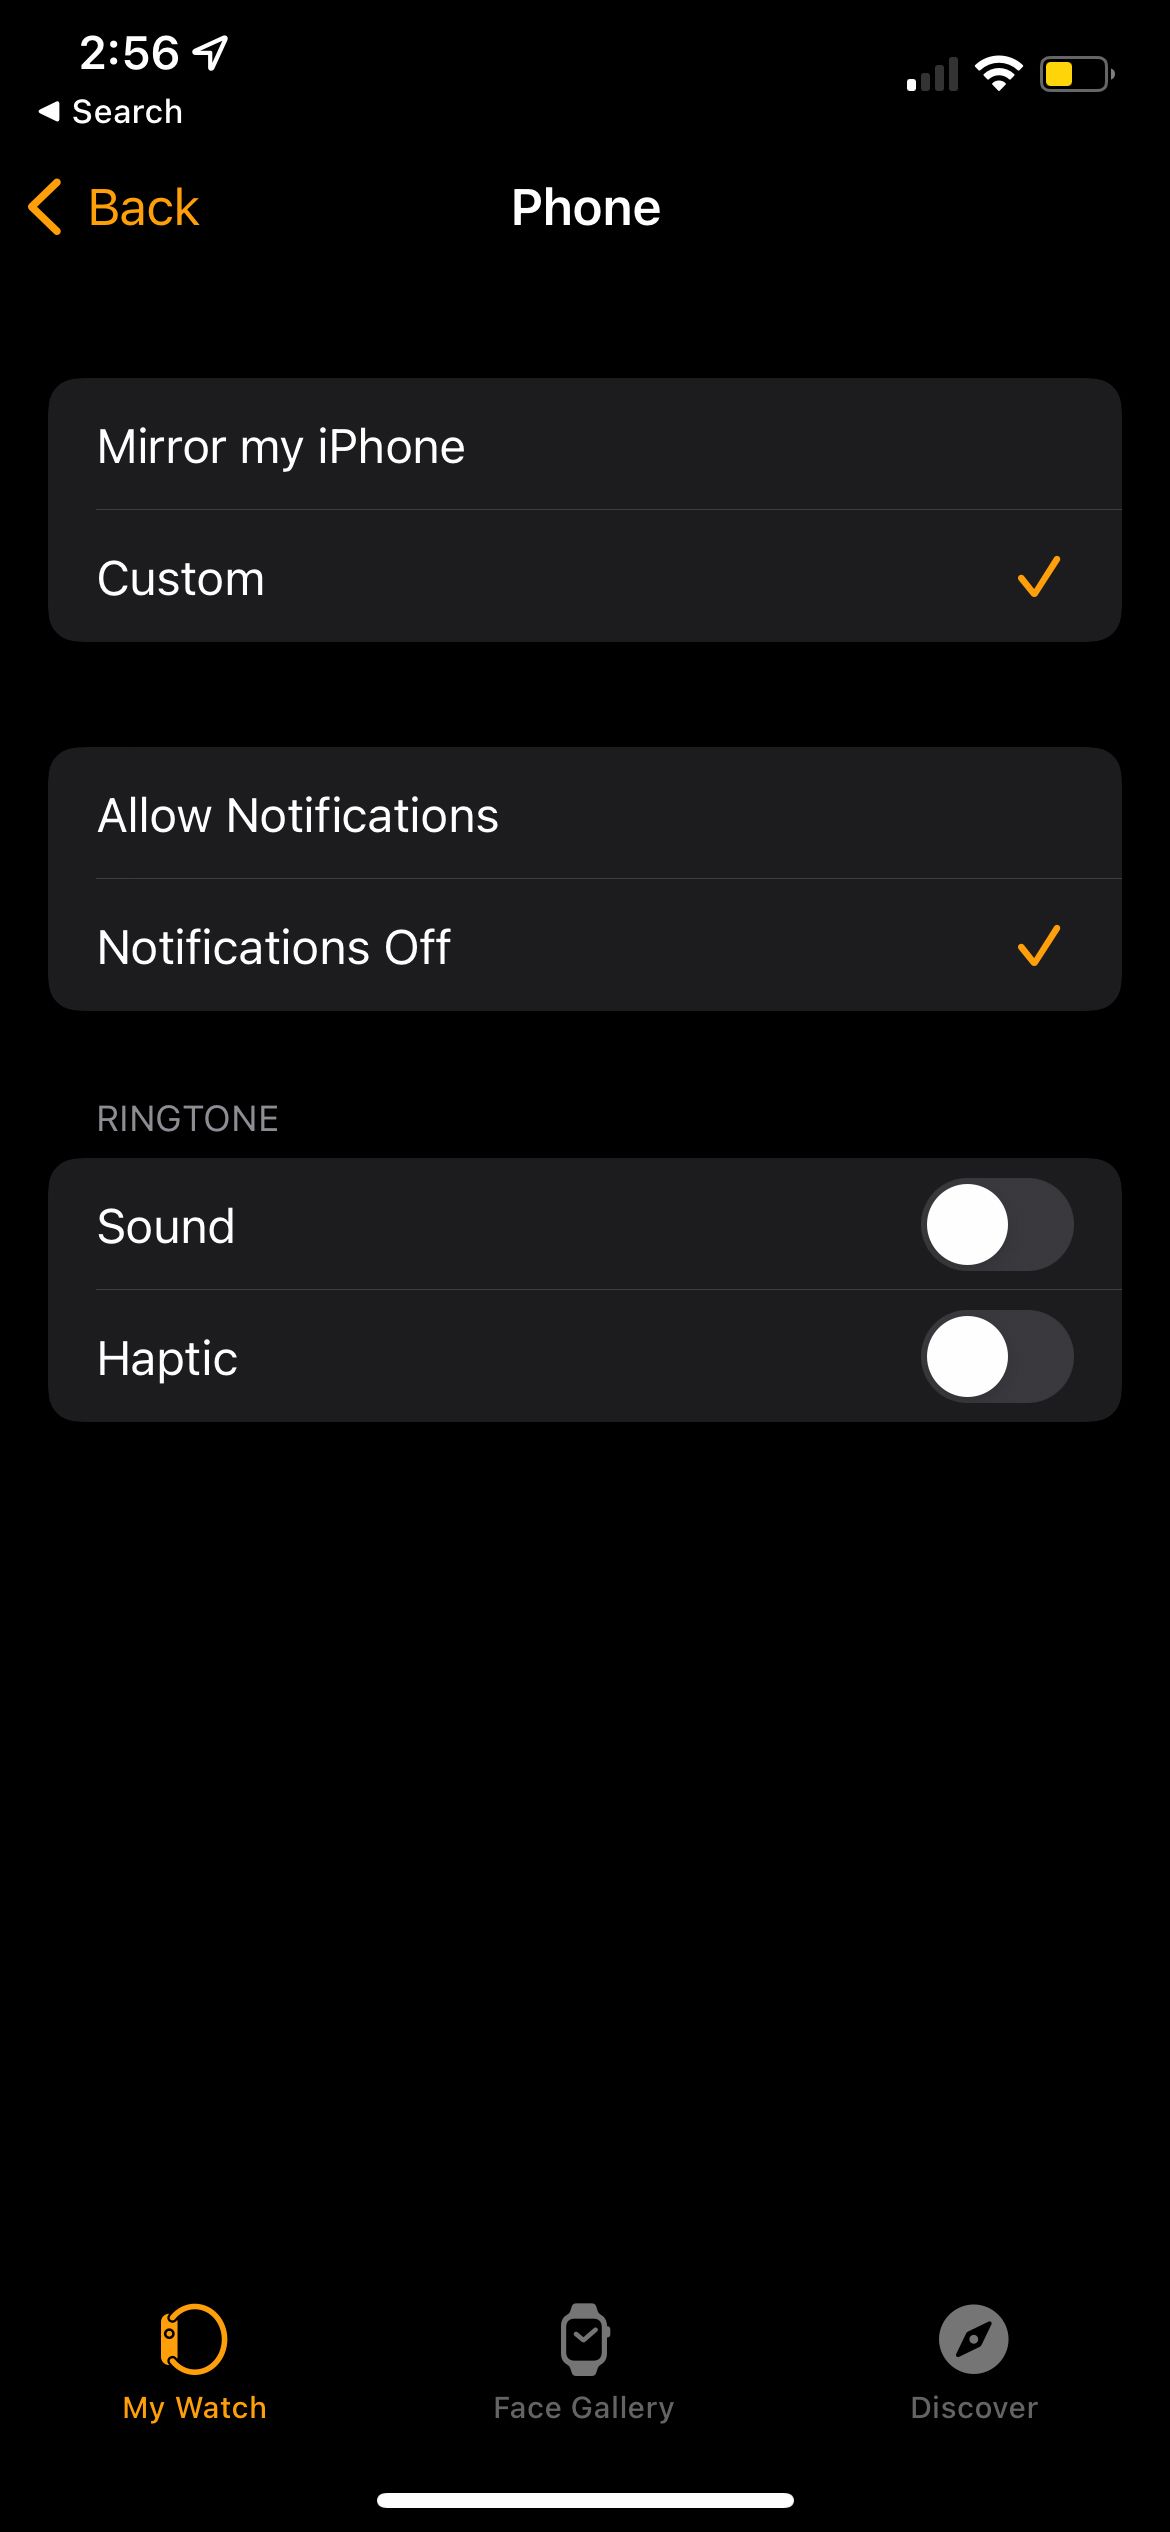 Turn Phone Notifications Off